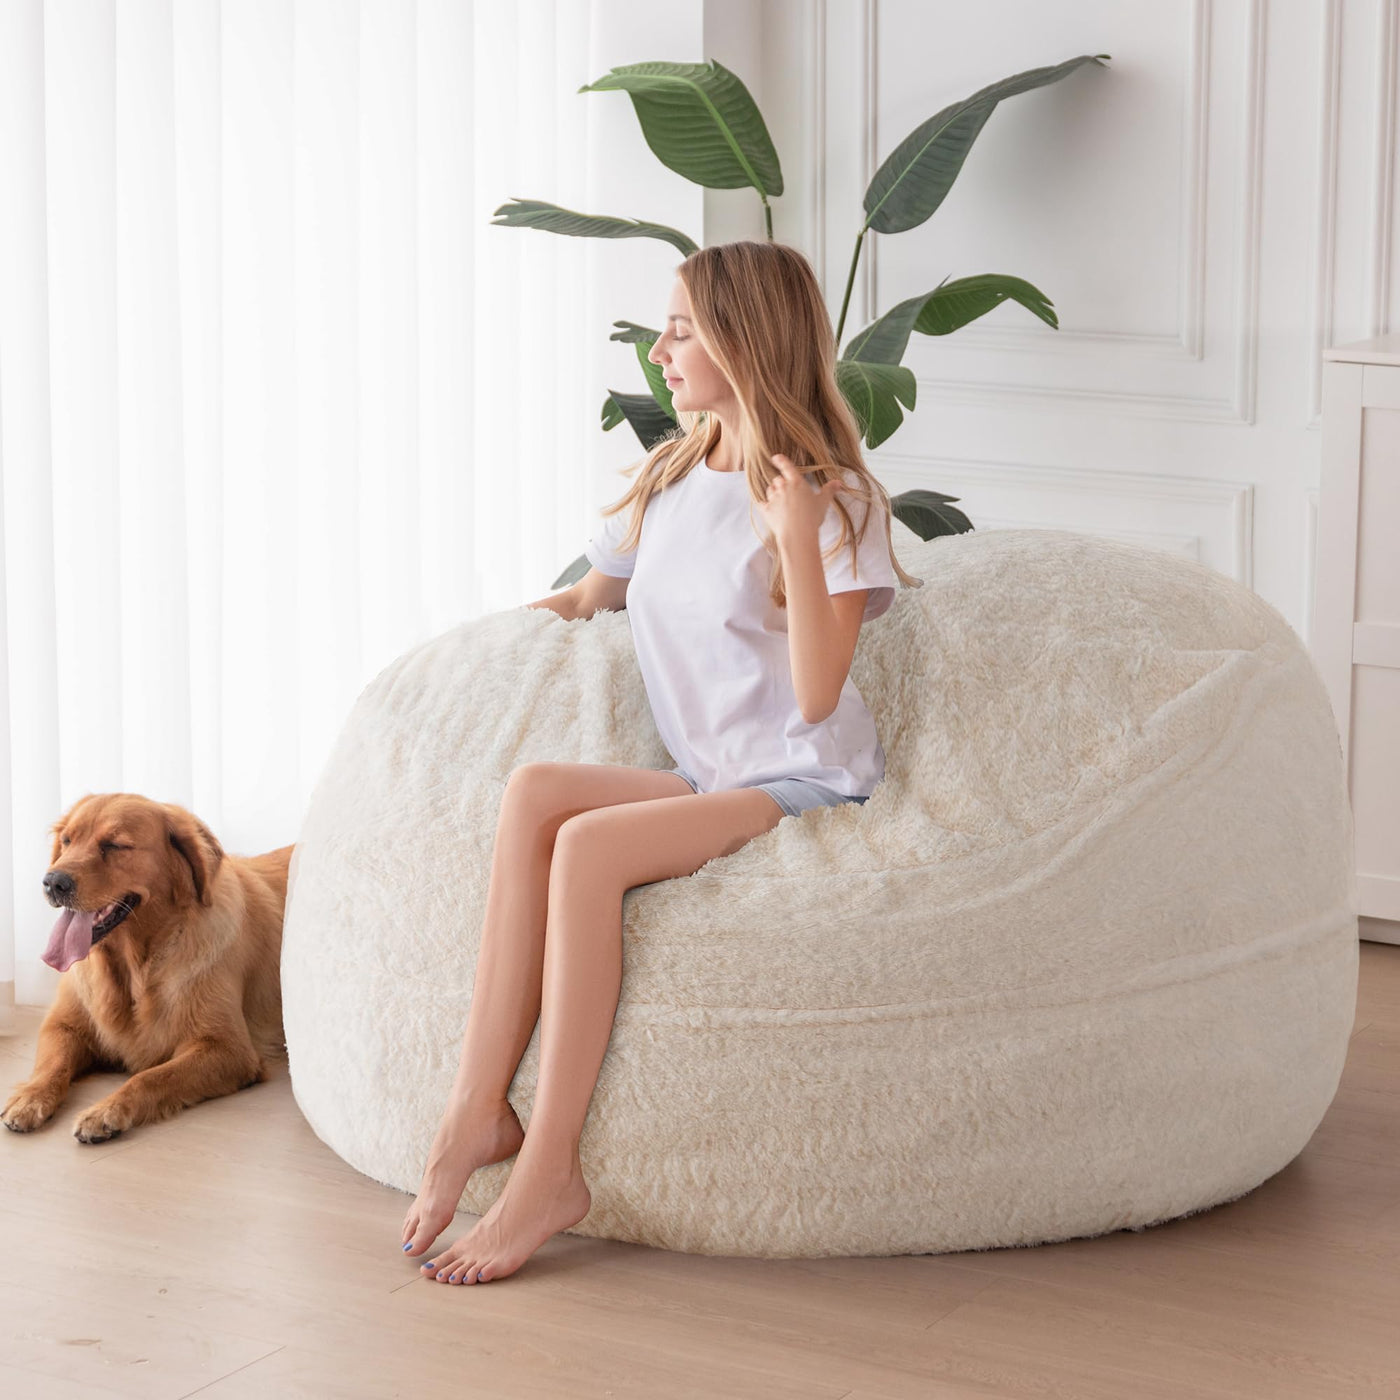 MAXYOYO Giant Bean Bag, Faux Fur Convertible Beanbag Folds from Lazy Chair to Floor Mattress Bed, Beige